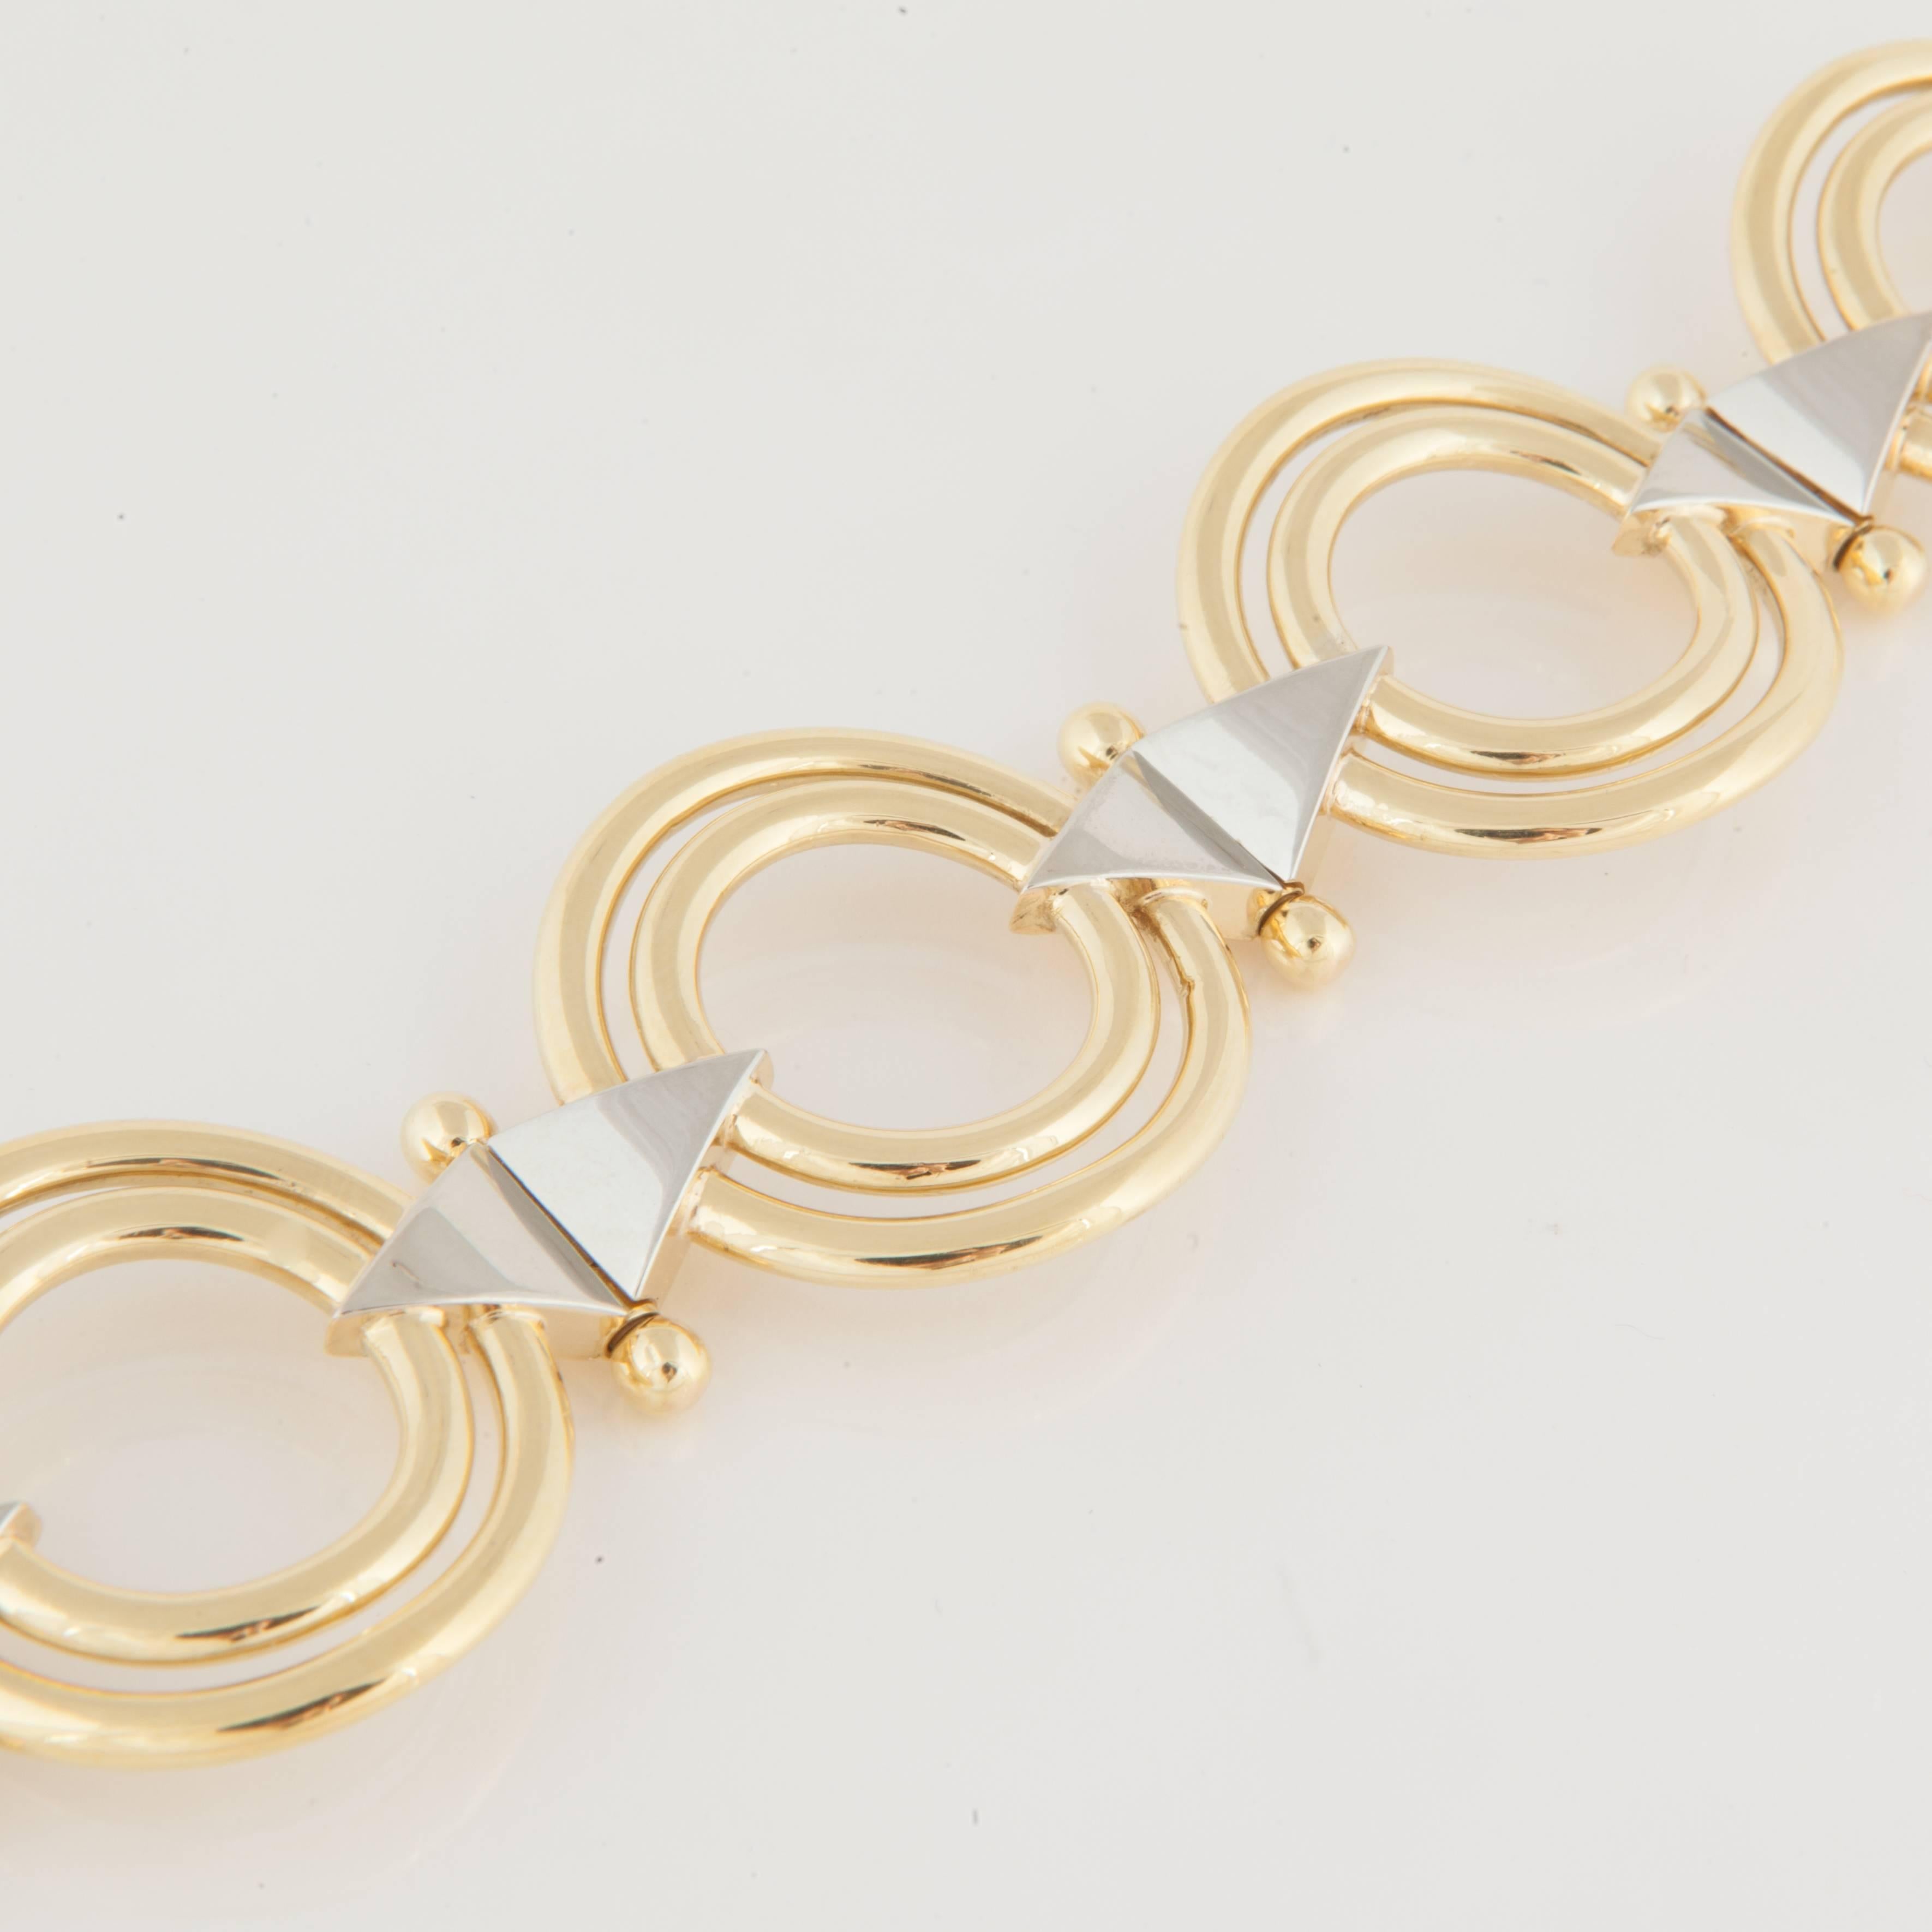 Retro bracelet in 18K yellow and white gold, comprised of concentric circles with hinged triangle links.  Measures 7 inches long and 1 1/8 inches wide.  Circa 1940-1950.